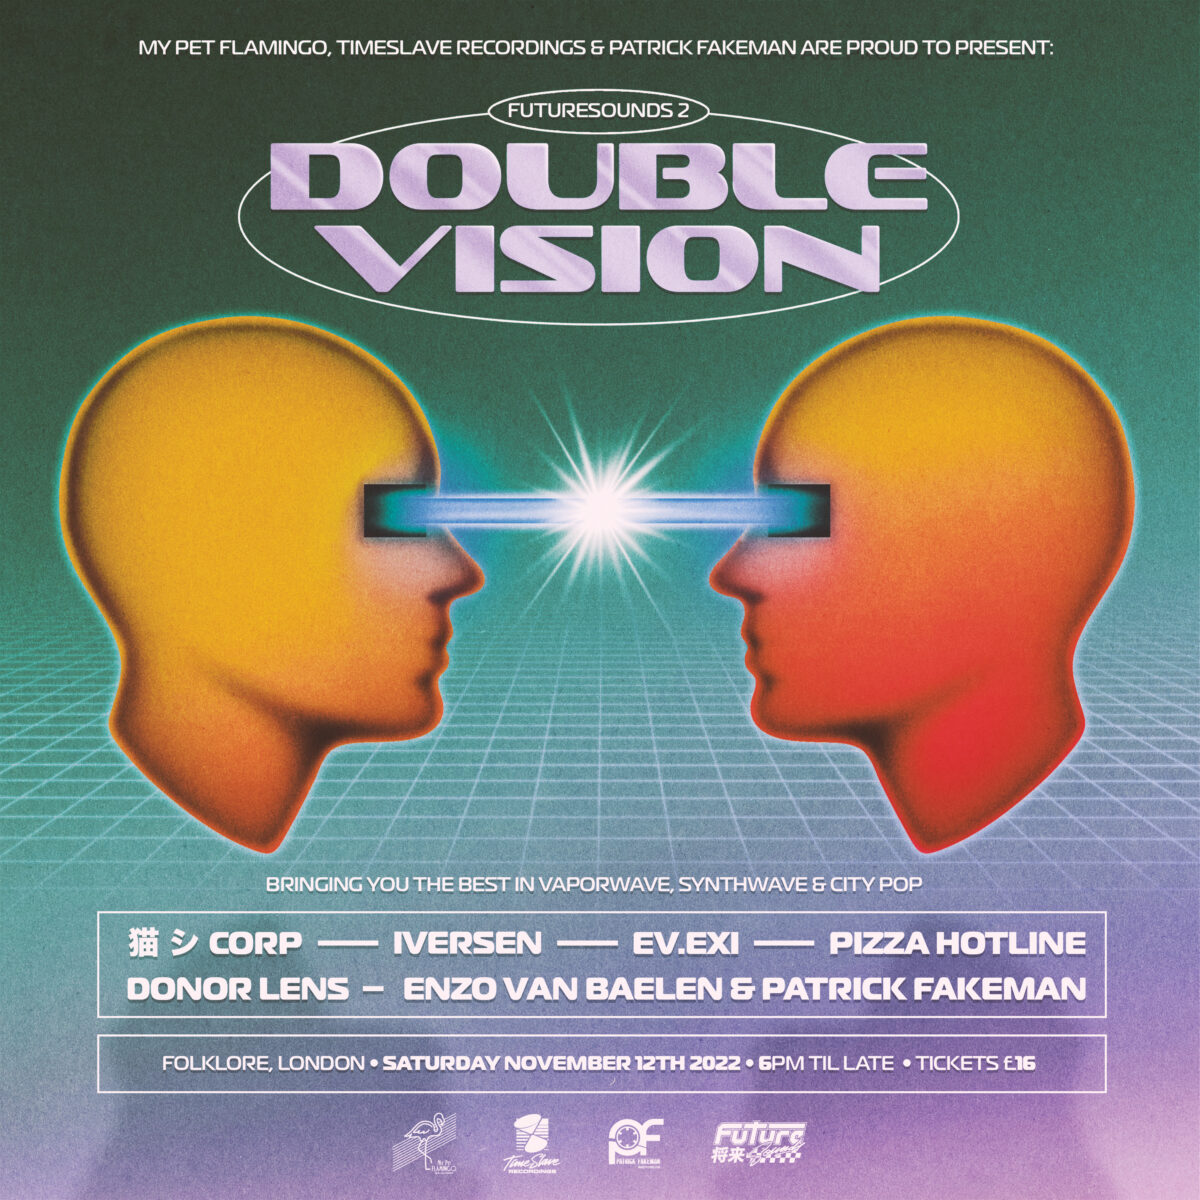 FutureSounds live events are back this November, with ‘Double Vision’!